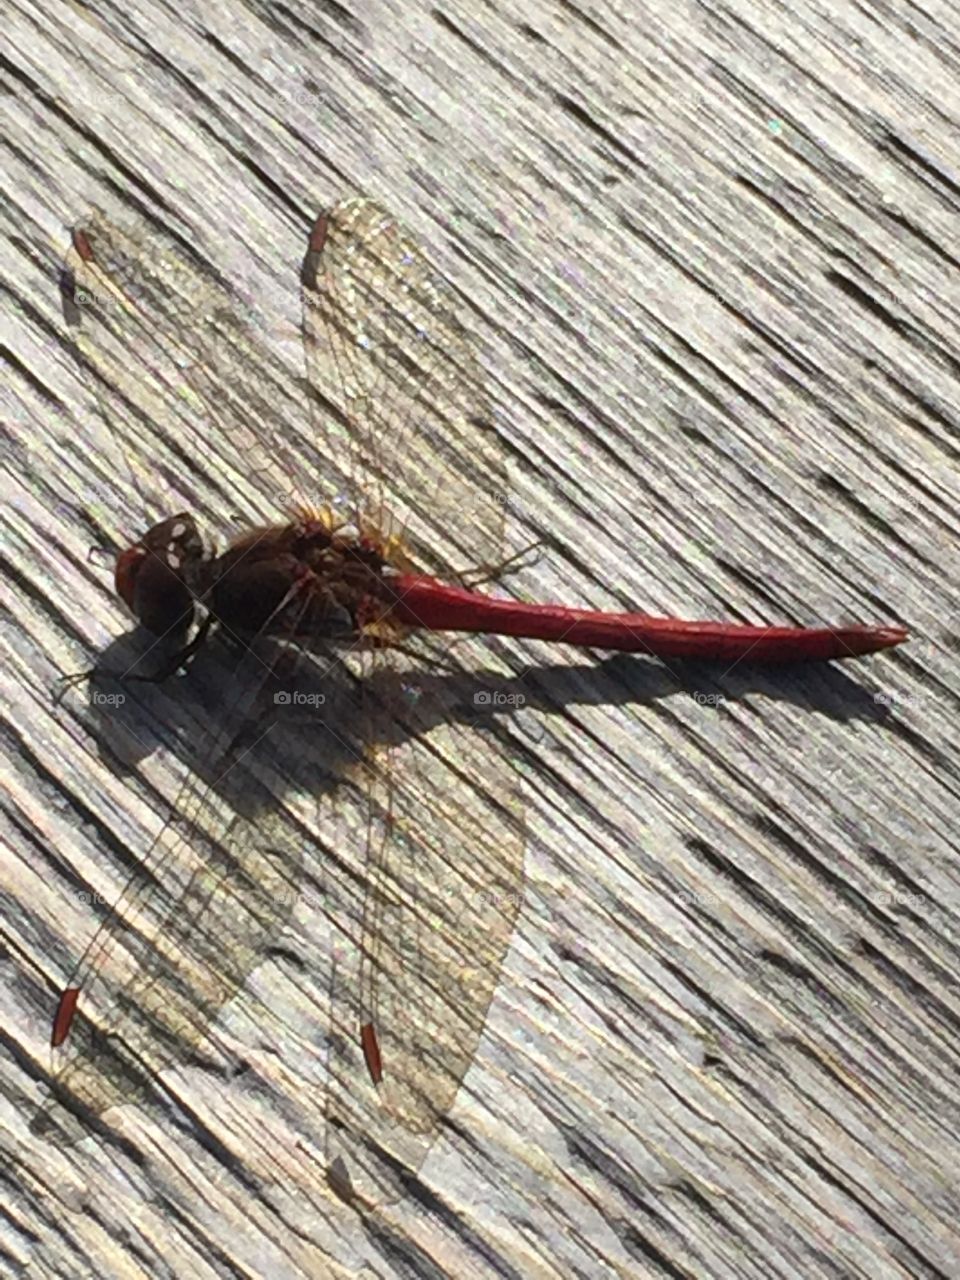 Close up red dragonfly on rough wood with wing detail